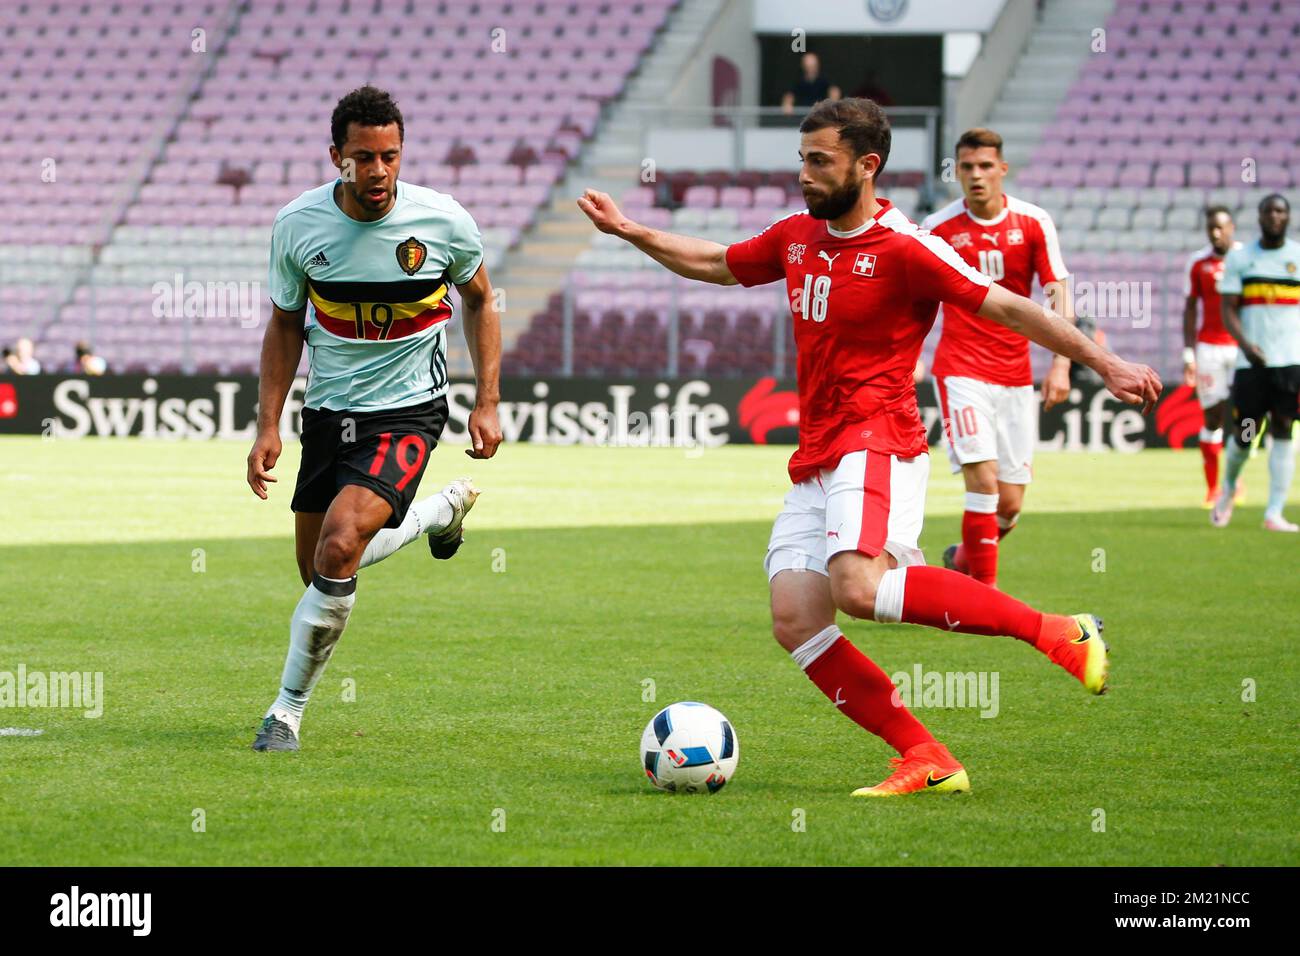 Belgium's Mousa Dembele and Switzerland's Admir Mehmedi fight for the ball during a friendly soccer game between the Swiss national team and the Belgian national soccer team Red Devils, after a training camp, on Saturday 28 May 2016, in Geneve, Switzerland. The team is preparing for the upcoming Euro 2016 UEFA European Championship in France.  Stock Photo